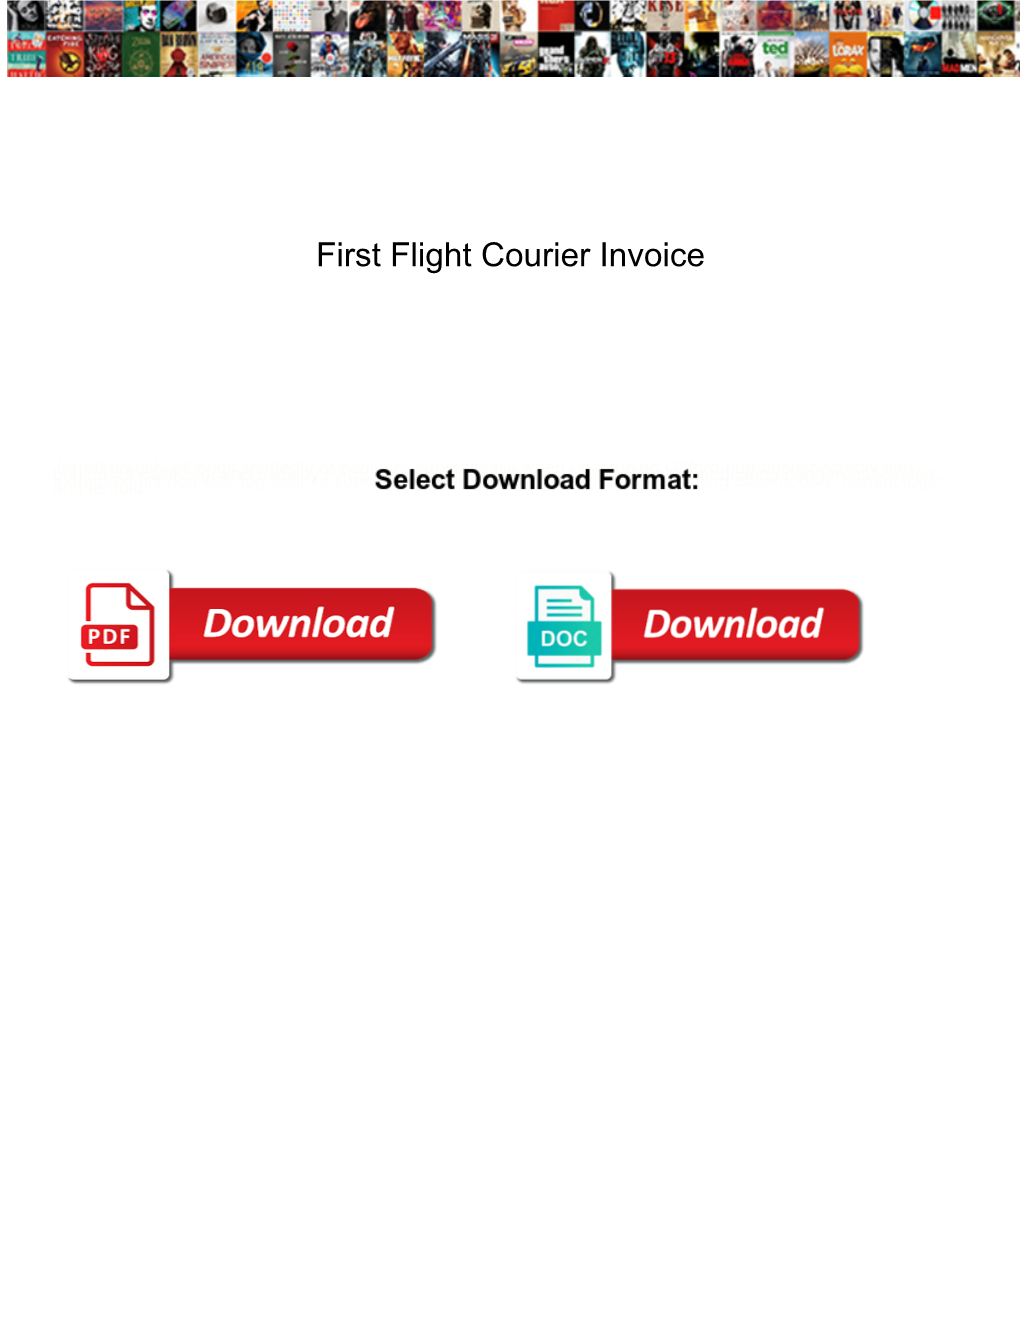 First Flight Courier Invoice